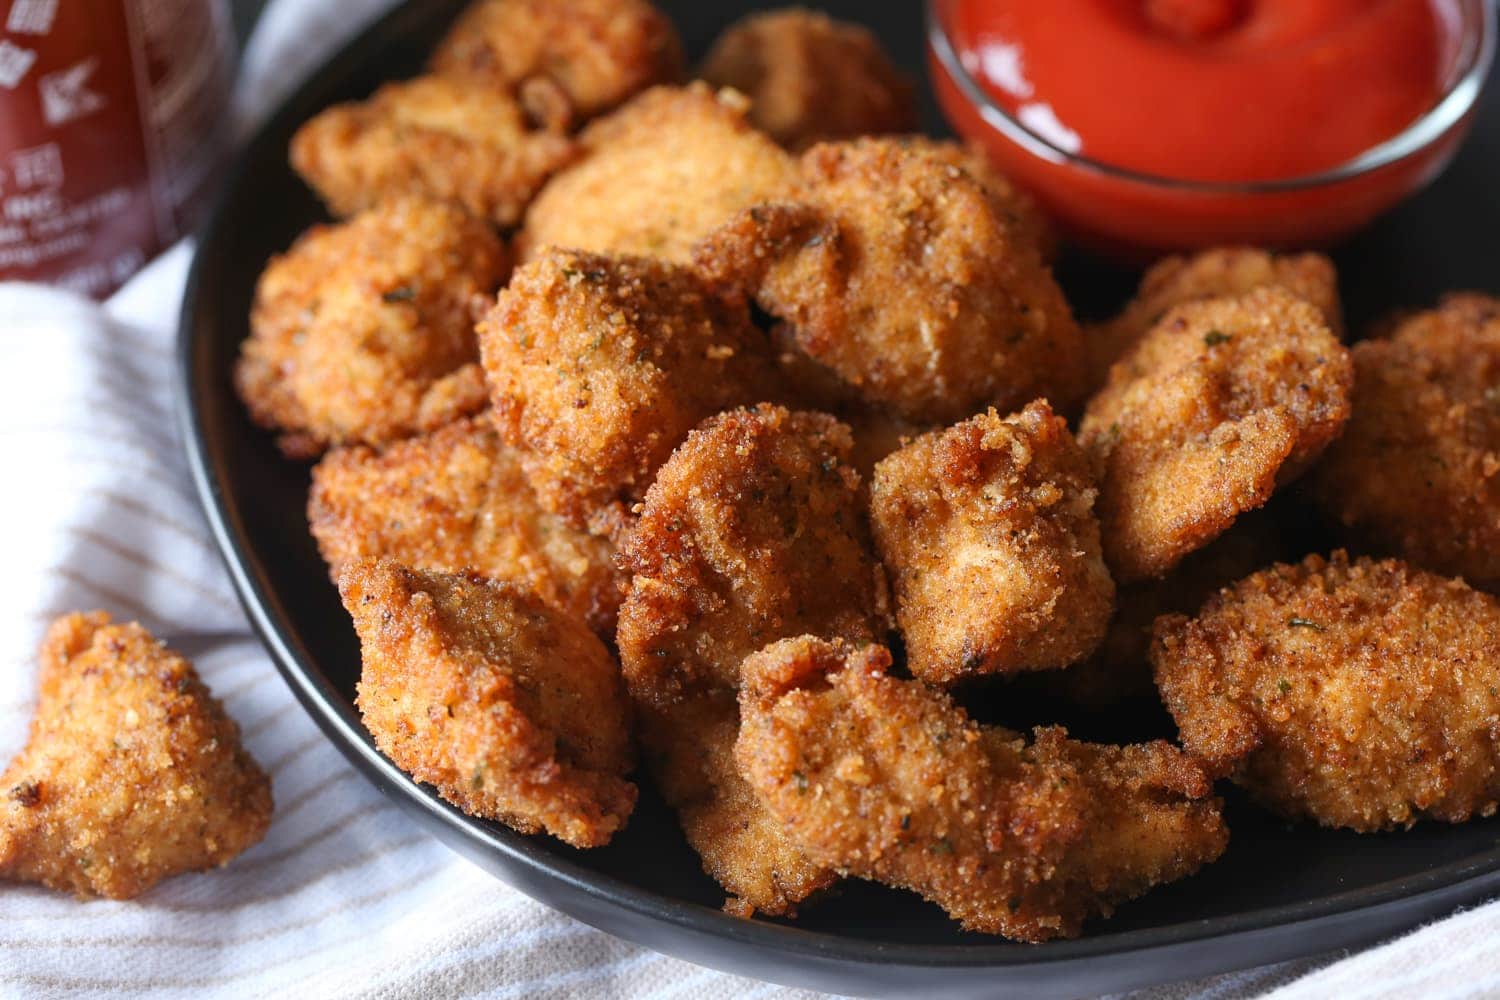 Spicy chicken nuggets on a plate next to a bowl of hot sauce for dipping.